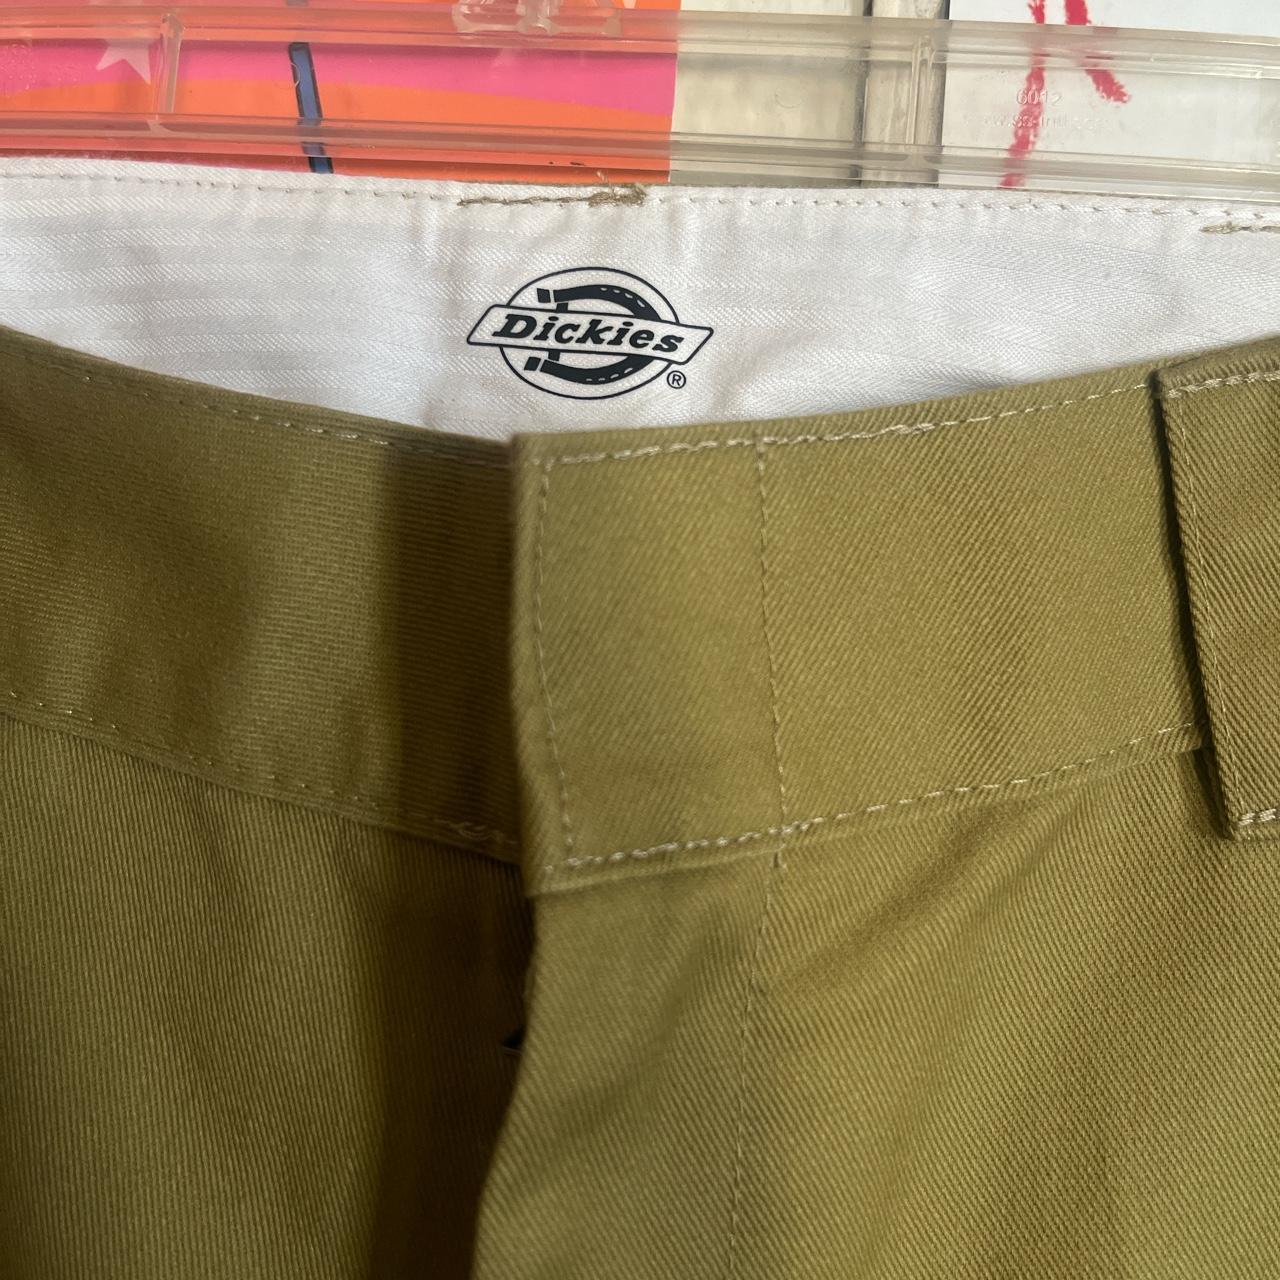 Dickies women's regular fit cropped pants with a raw - Depop